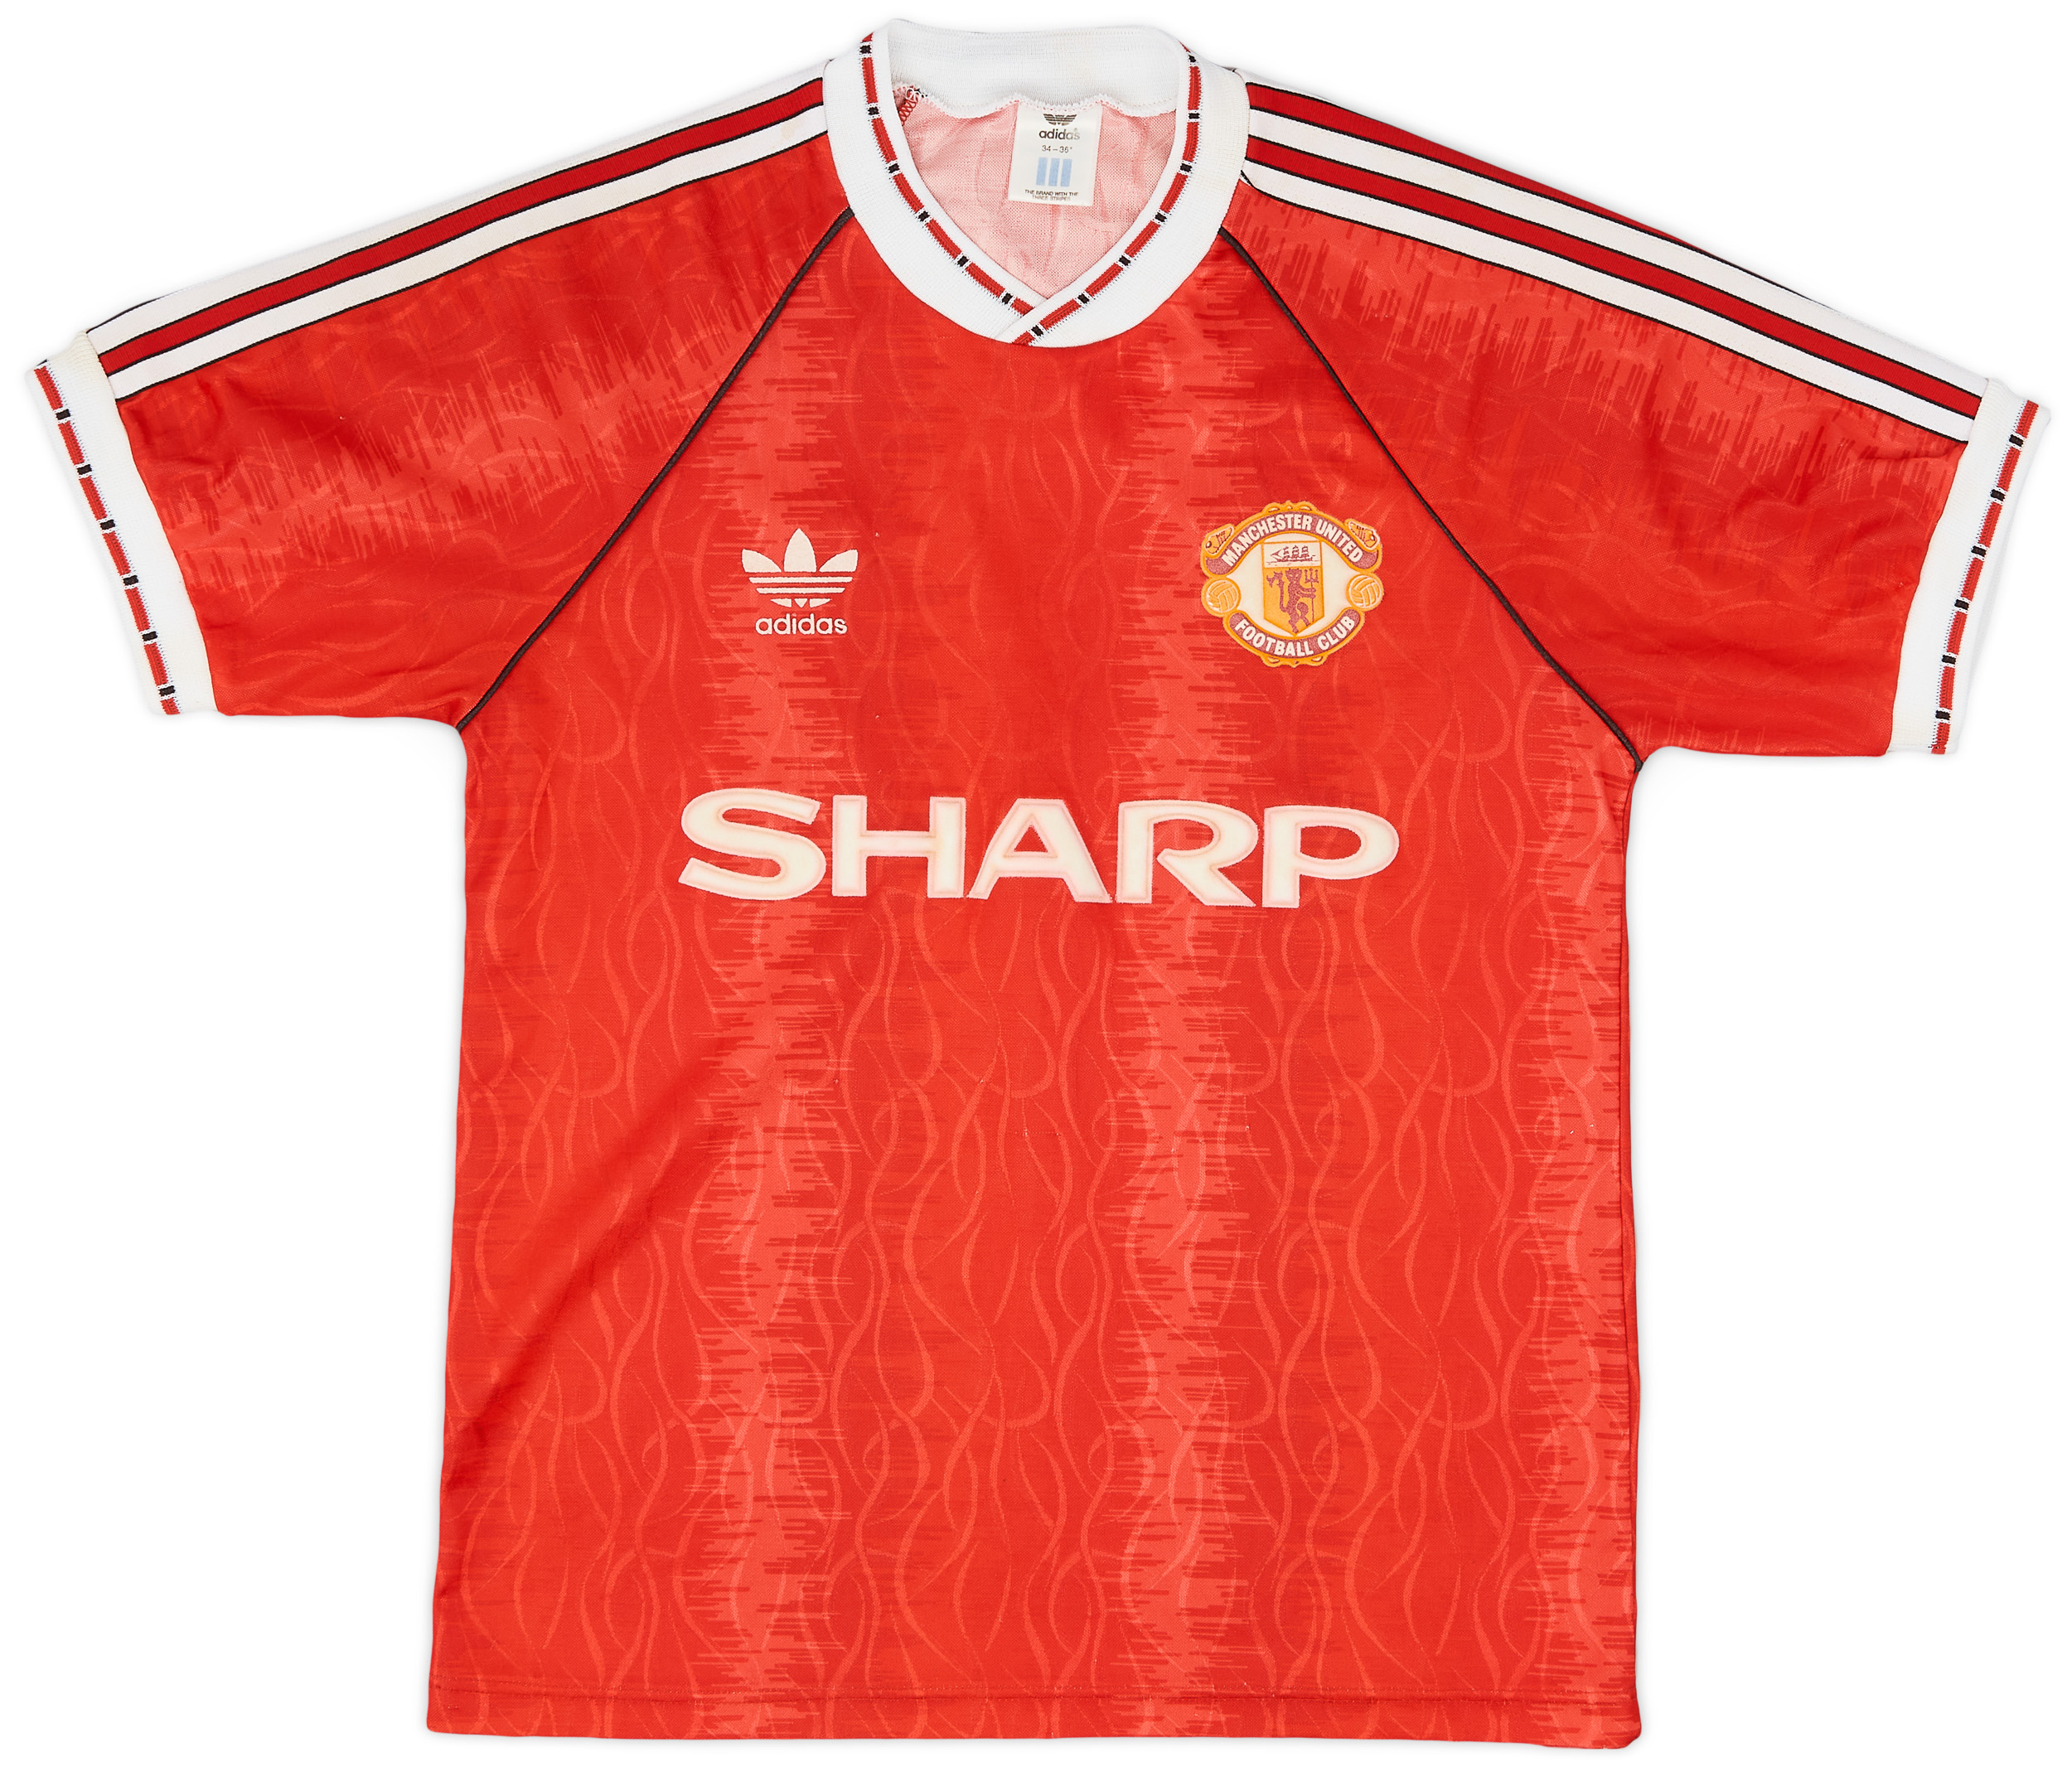 1990-92 Manchester United Home Shirt - 7/10 - ()